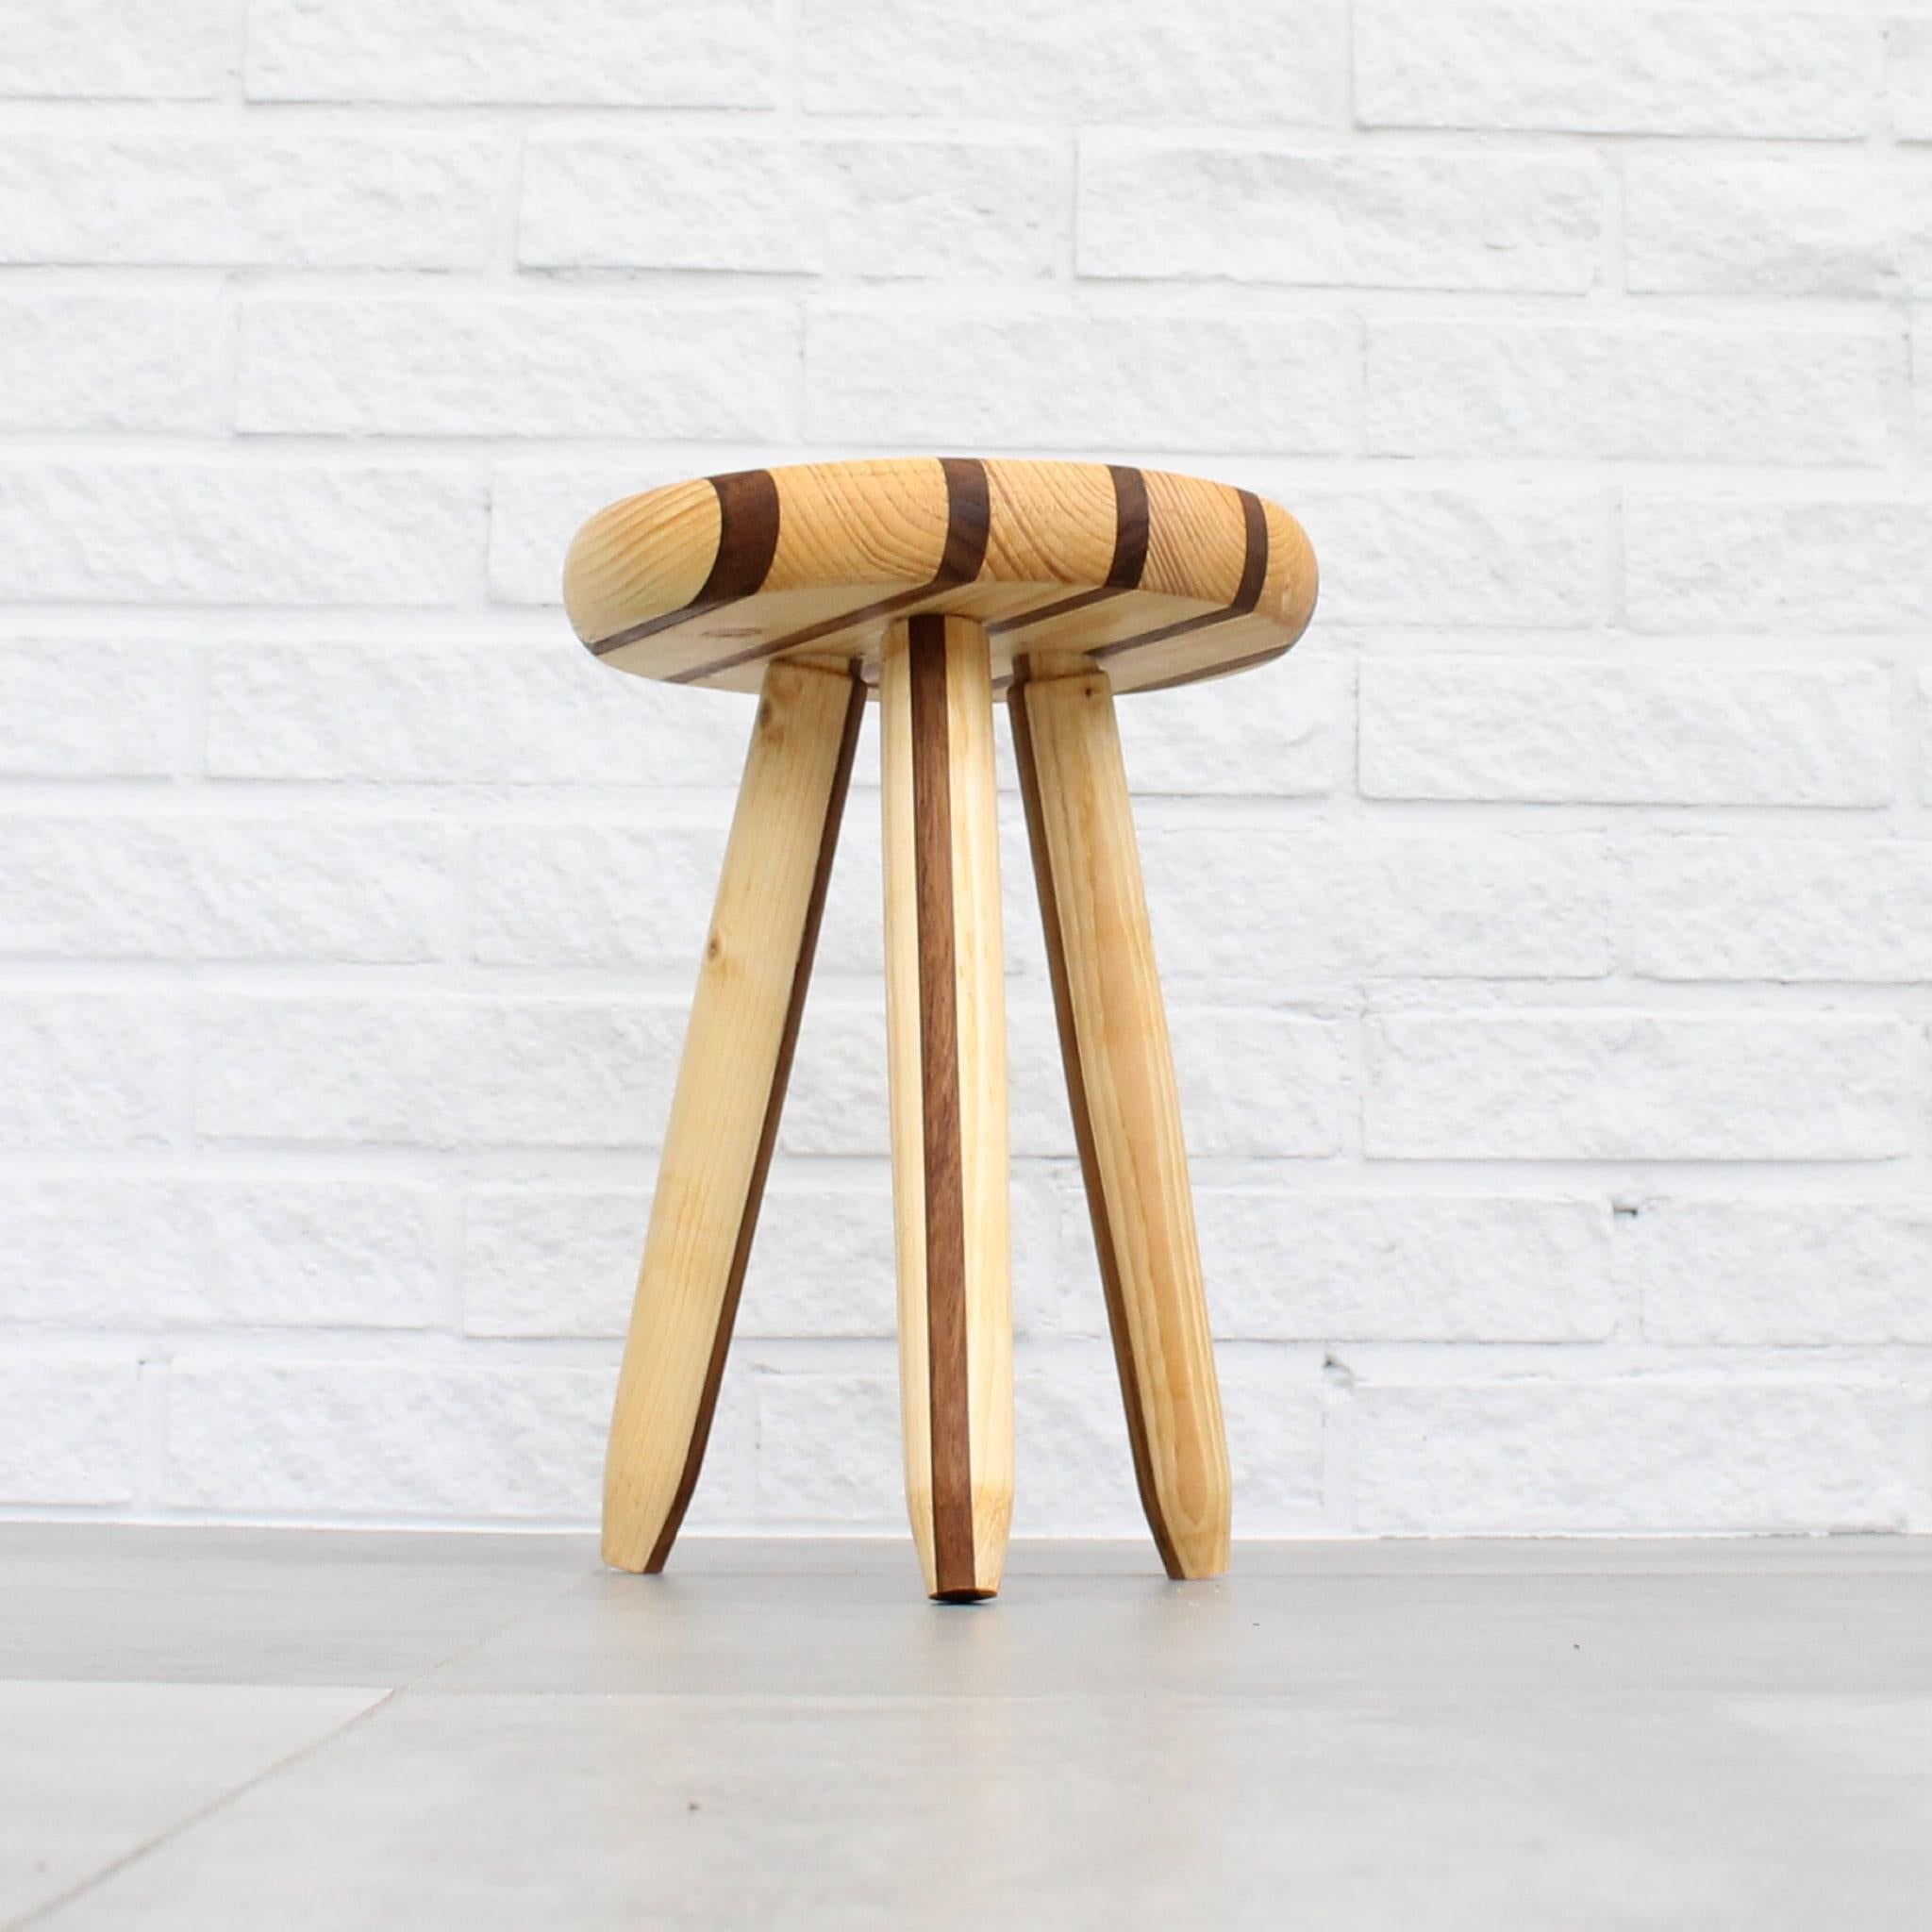 Swedish milking stool crafted from pine, seat with solid teak stripes. Handcrafted by Andreas Zätterqvist in Sweden using traditional techniques and mainly local materials. This very piece was exhibited at the ‘Gjort är gjort” exhibition in